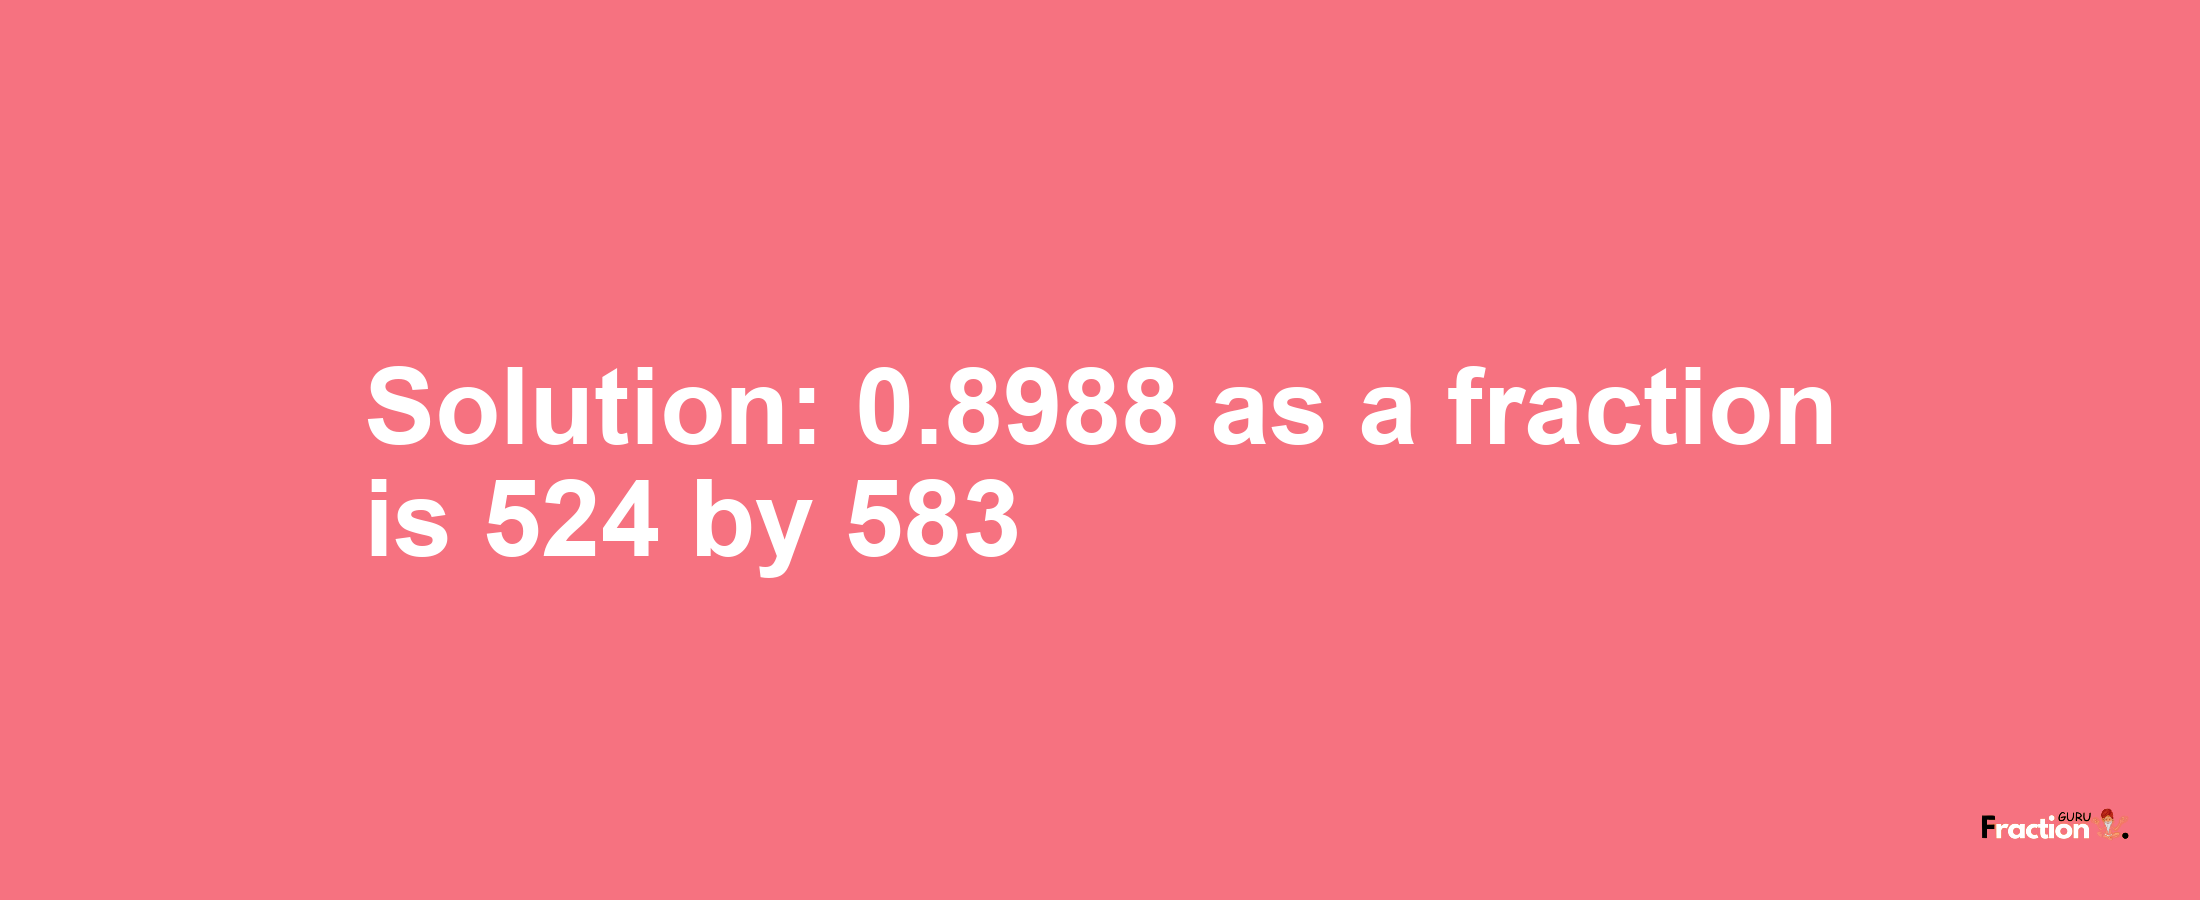 Solution:0.8988 as a fraction is 524/583